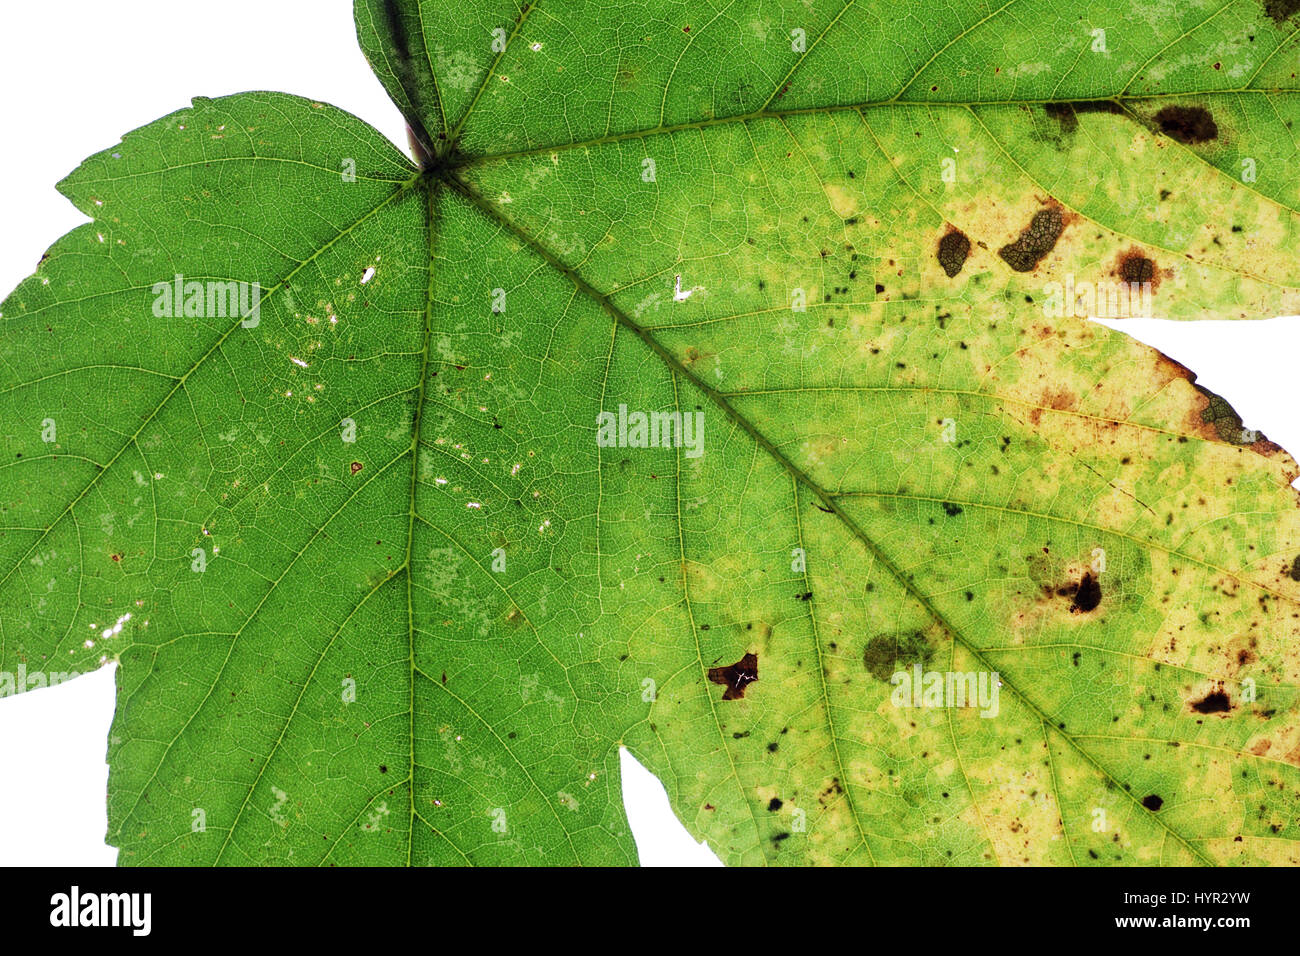 Sycamore Acer pseudoplatanus leaf cut out showing Tar-spot fungus Rhytisma acerinum Stock Photo